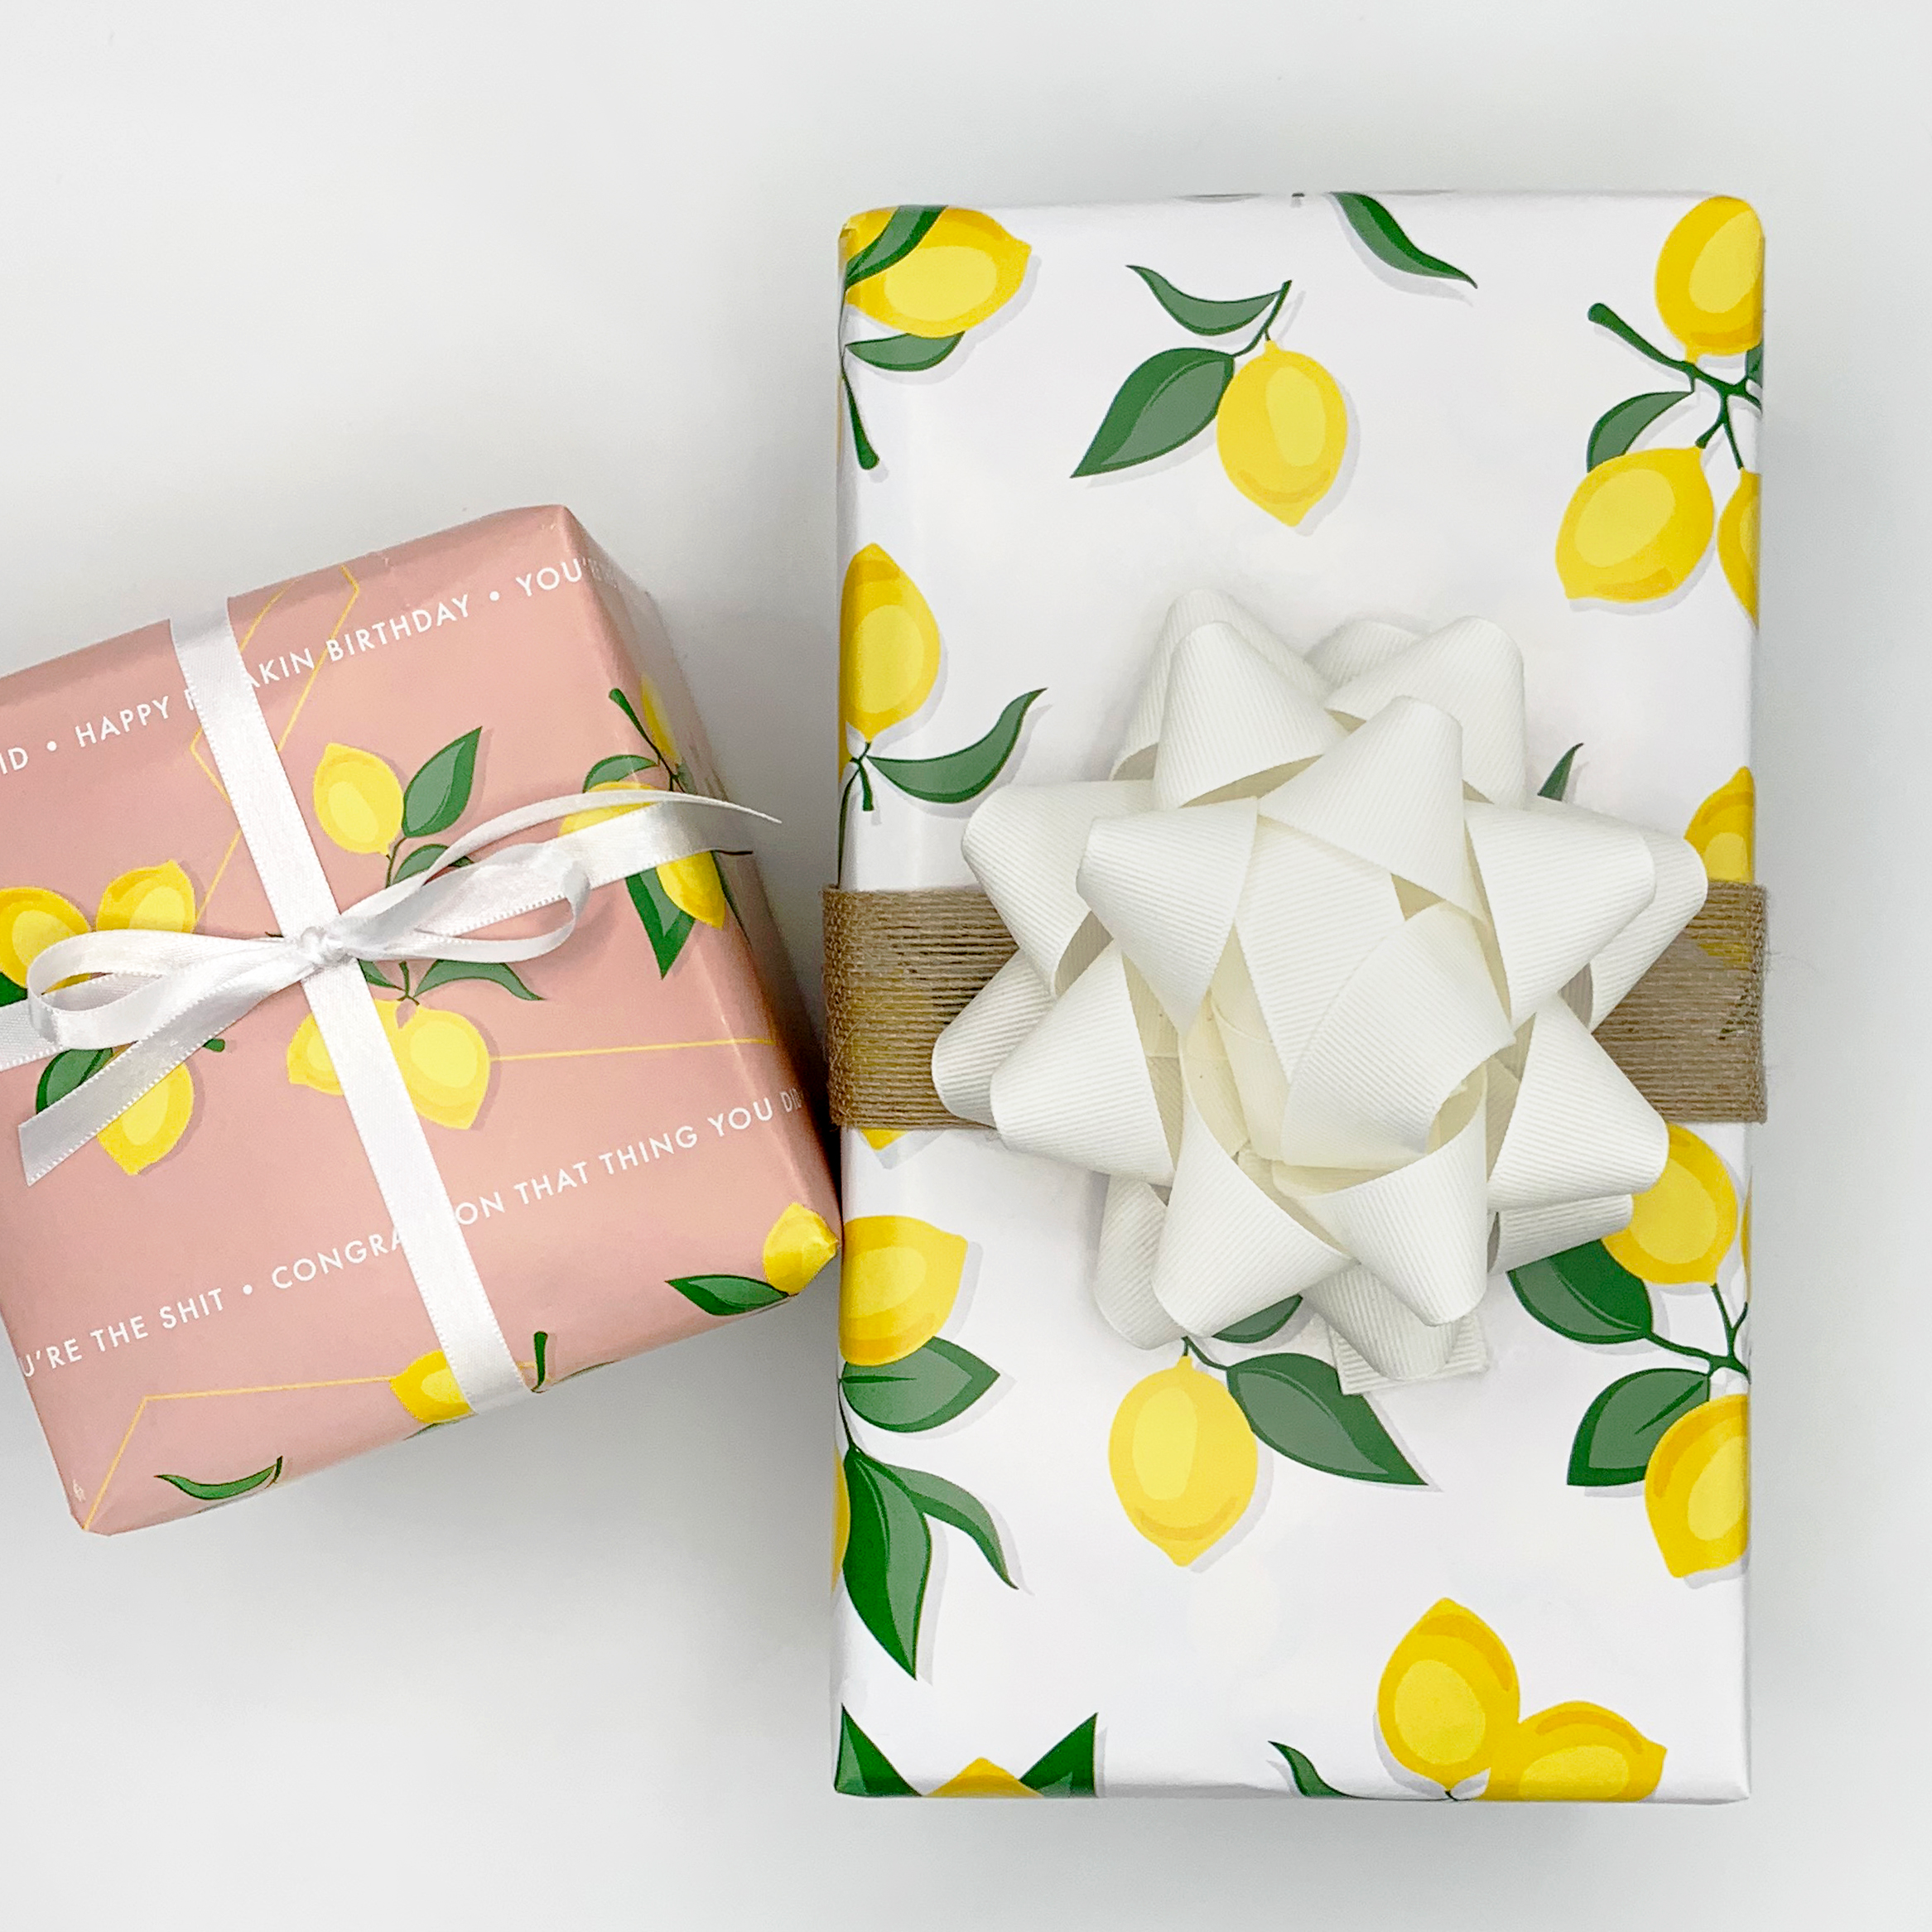 10 of the Prettiest Christmas Wrapping Papers You Can Shop on Amazon